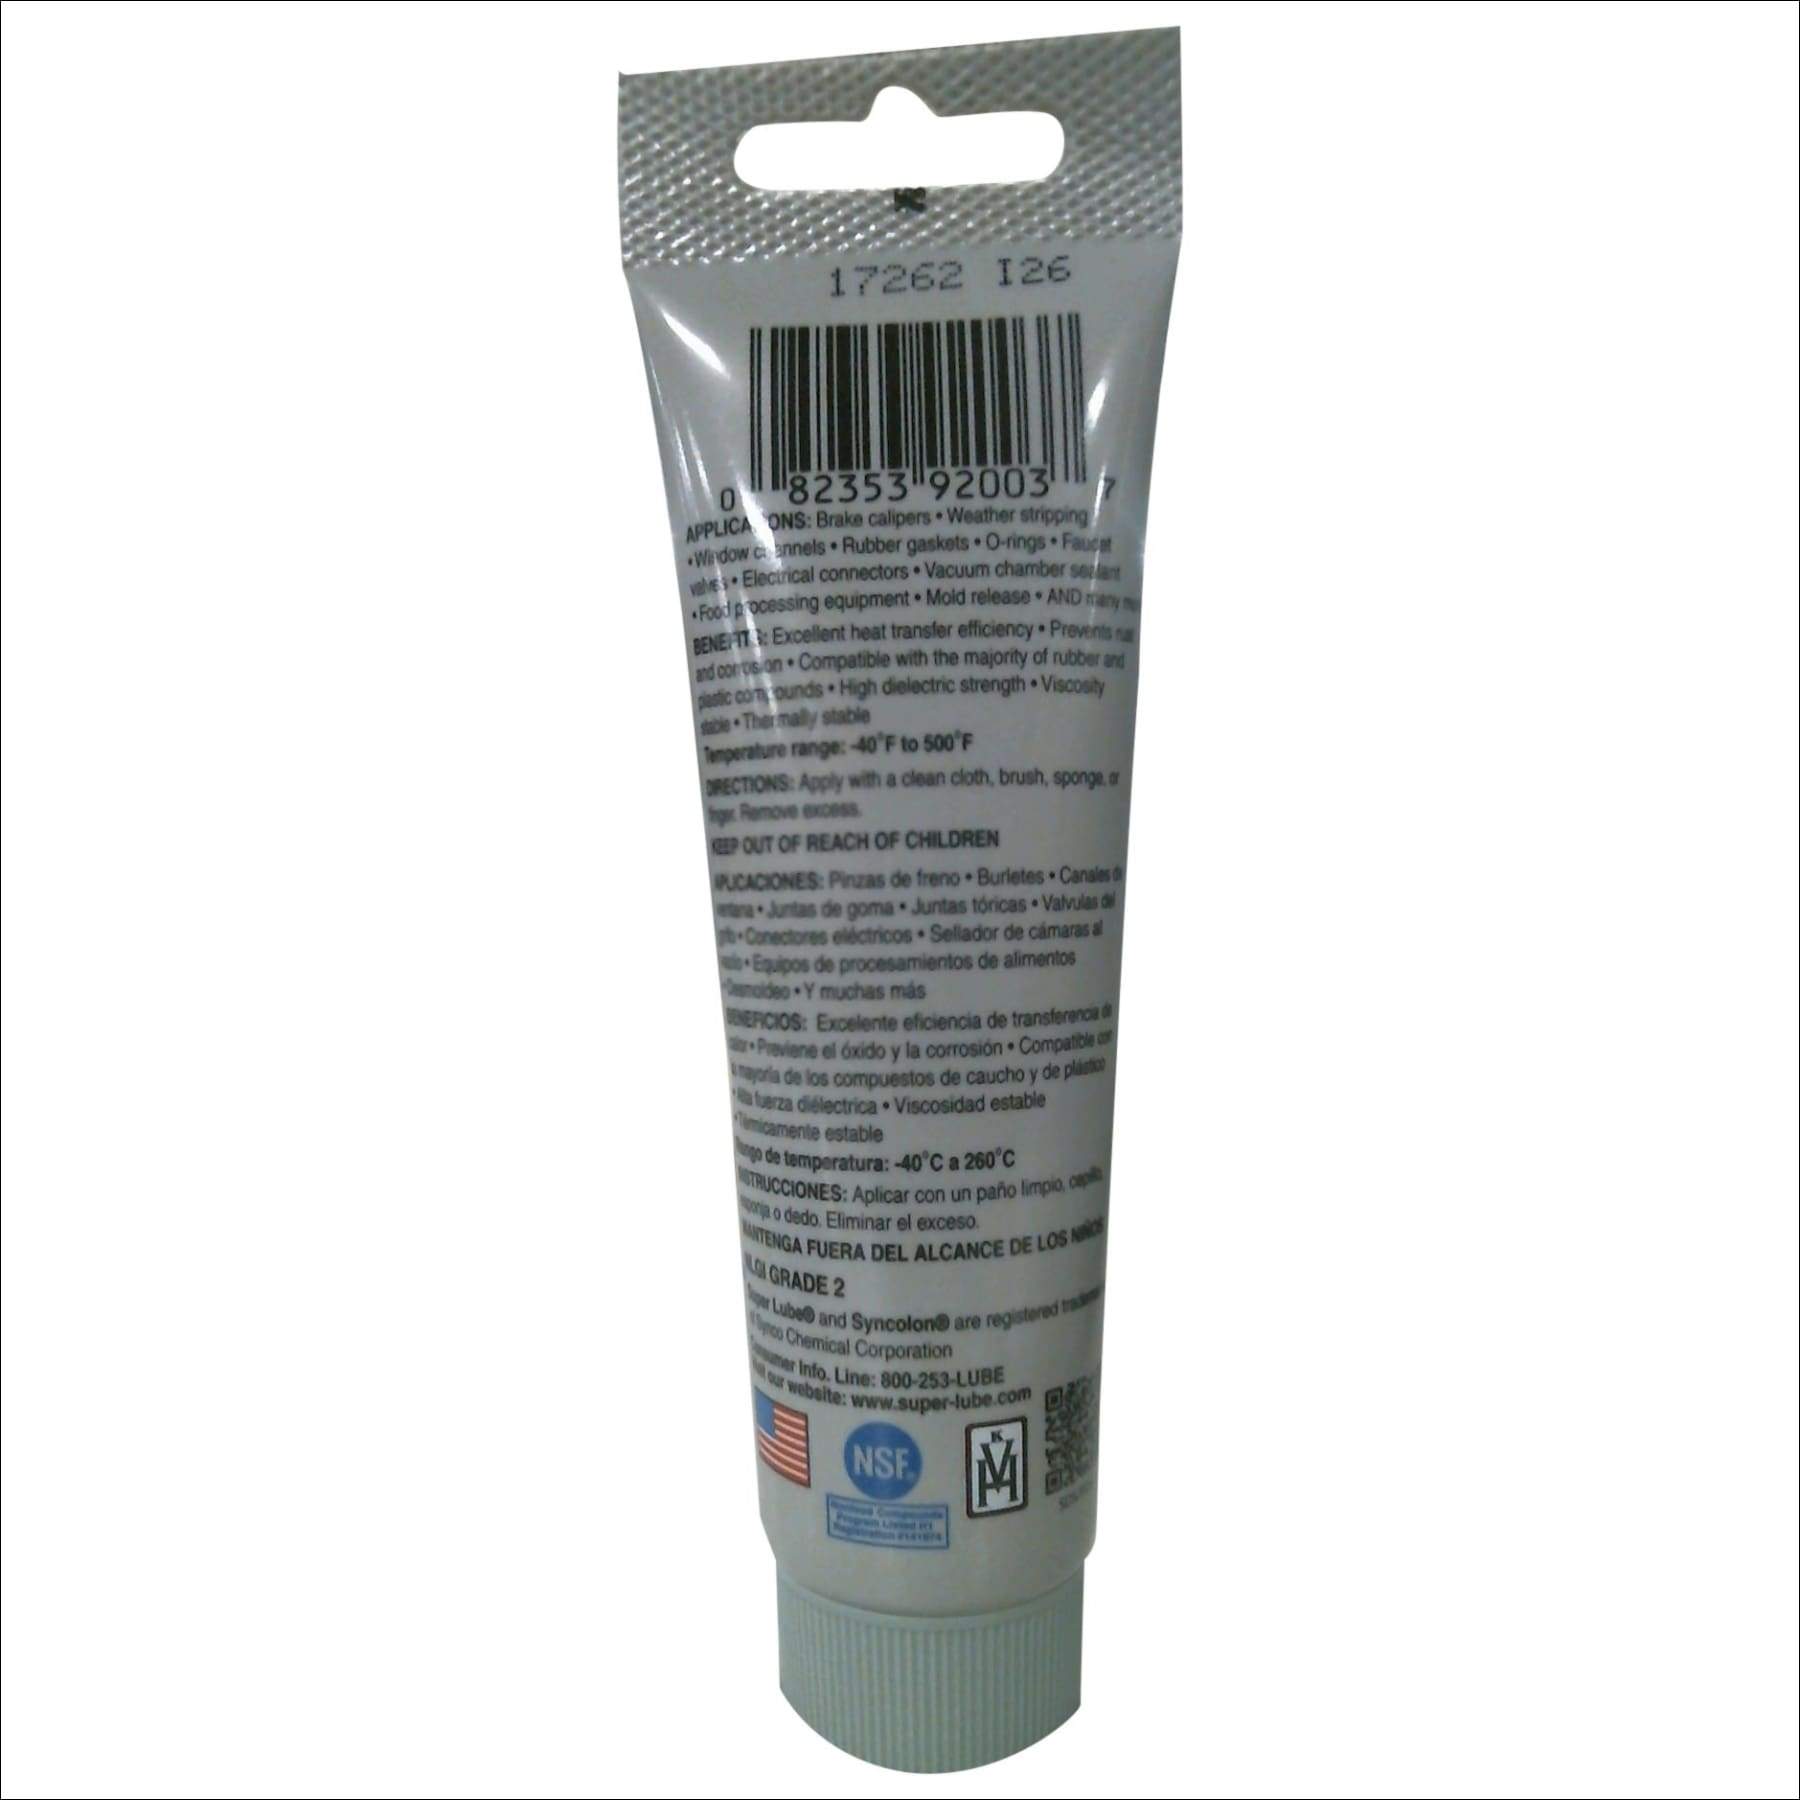 Super Lube Silicone Lubricating Grease with Syncolon (PTFE) - image 2 of 2